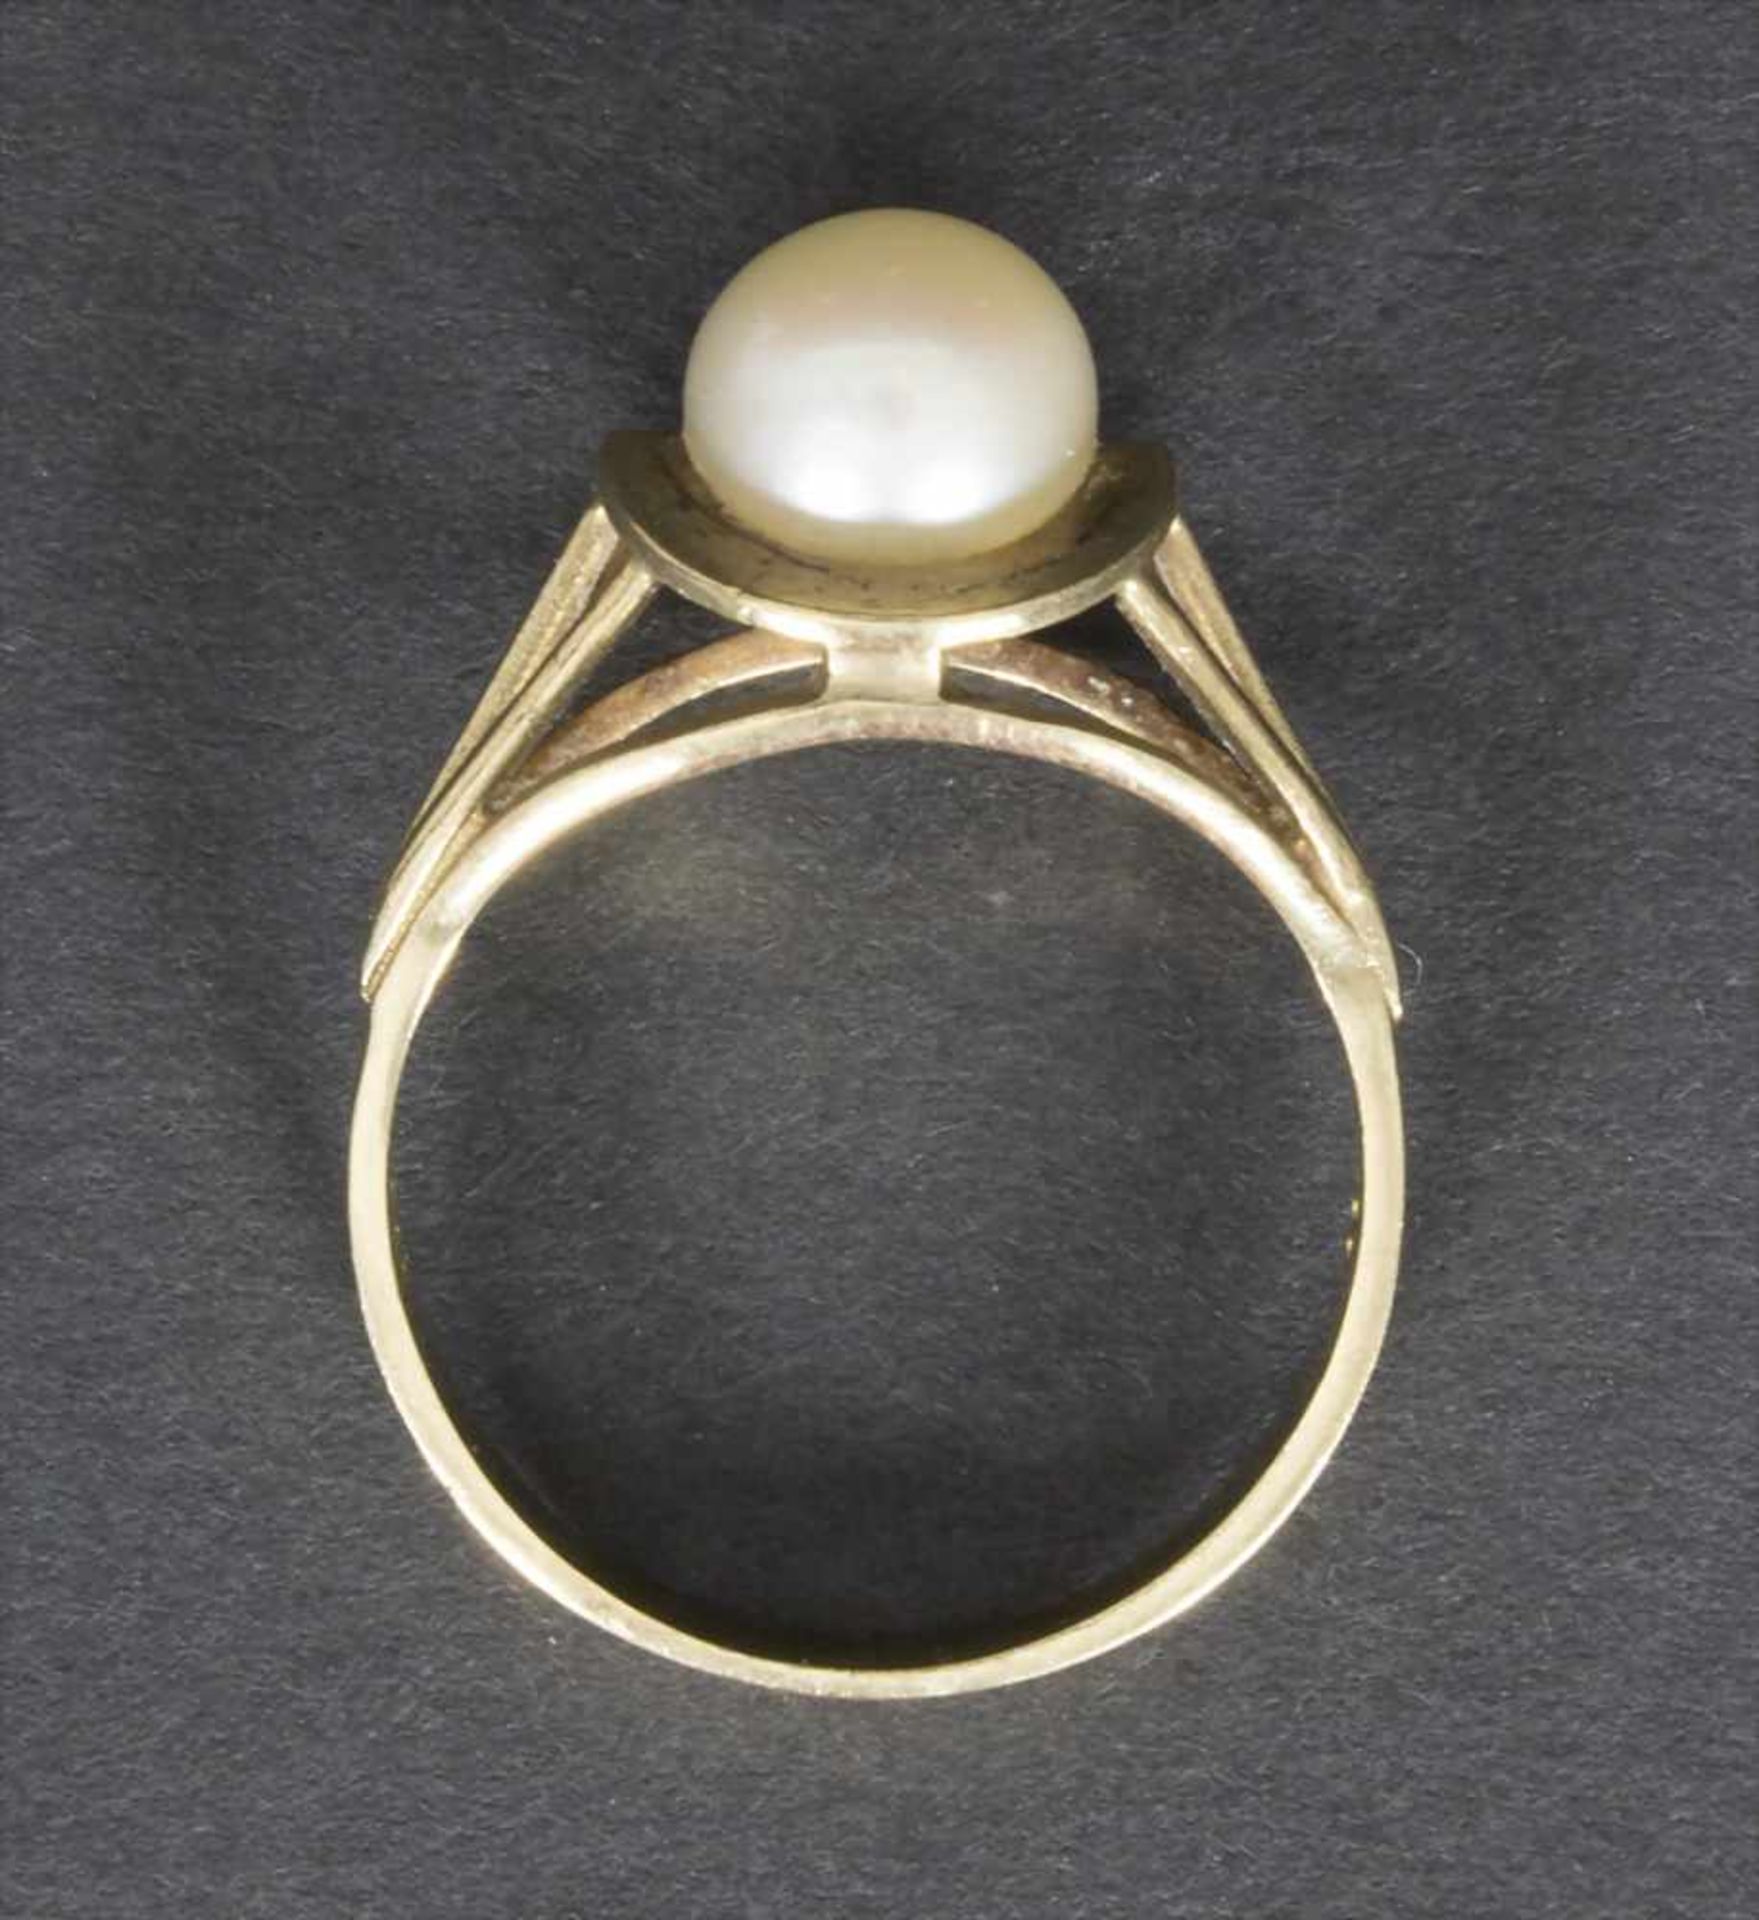 Damenring mit Perle / A ladies ring with a pearlMaterial: 8 Kt.333/000 Gold, Perle,Gewicht: 2,6 g, - Bild 2 aus 3